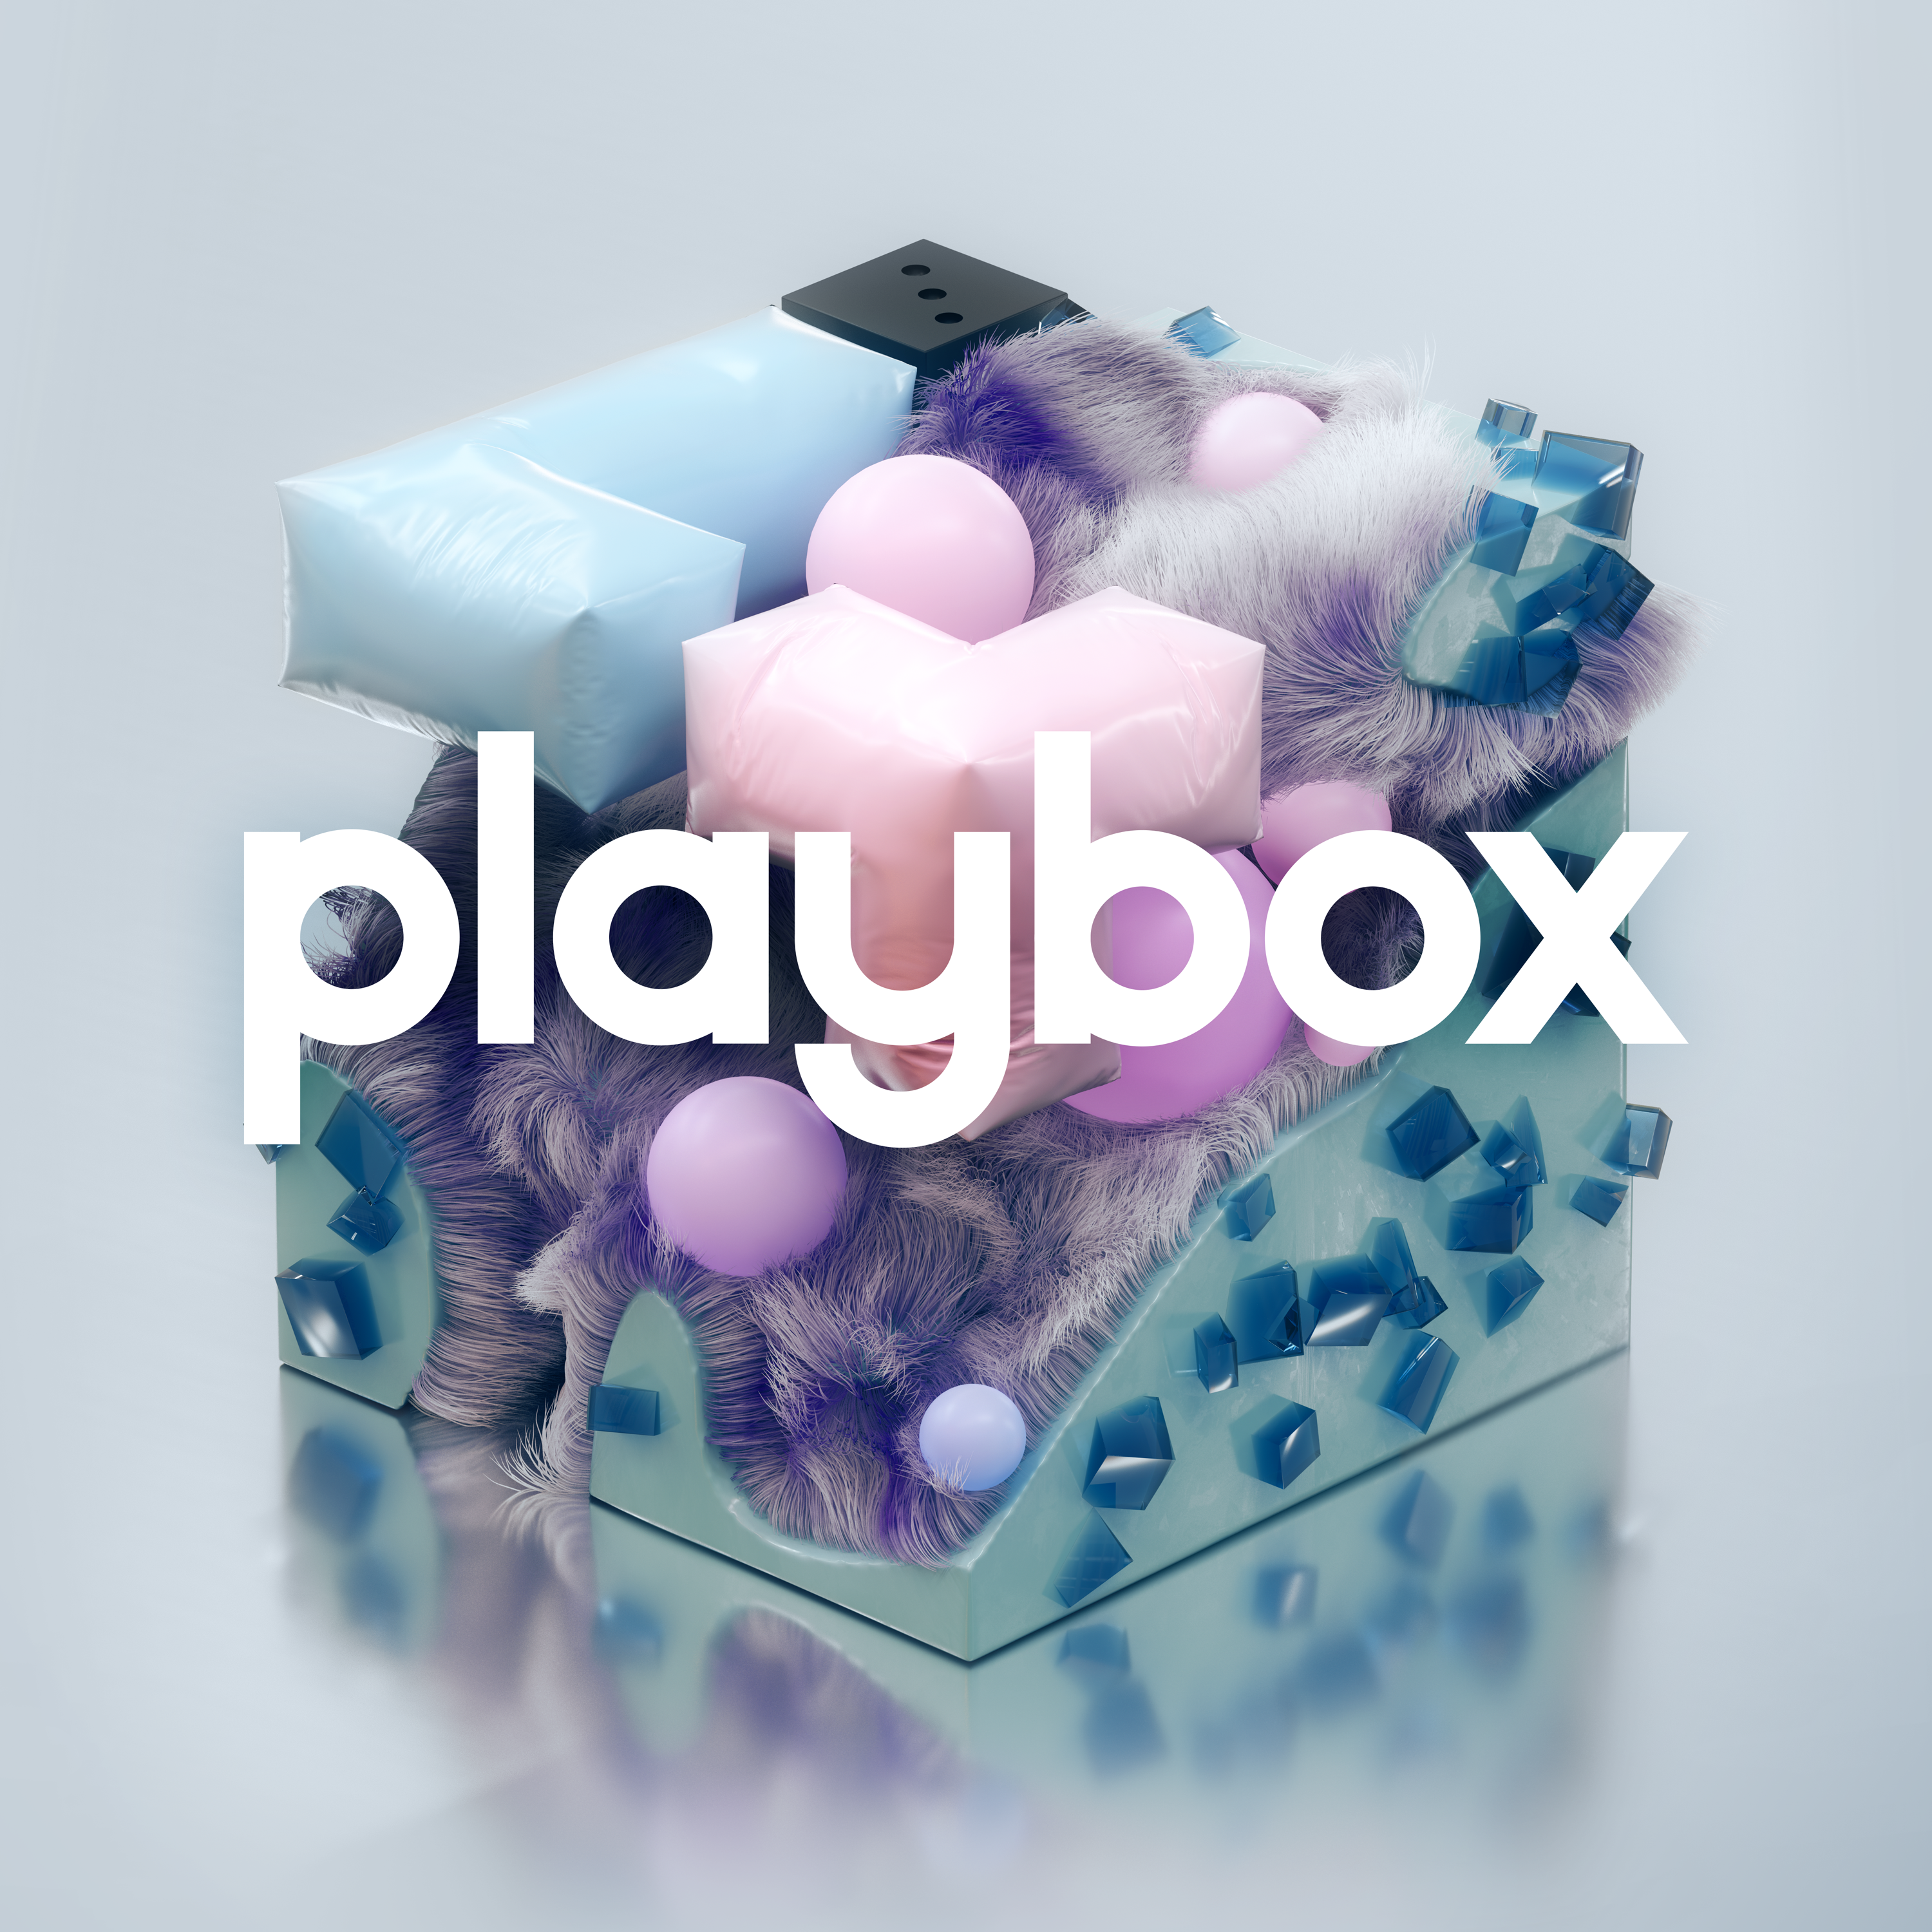 Review of Playbox by Native Instruments: The Coolest and Most Innovative Instrument I’ve Experienced in Quite Some Time